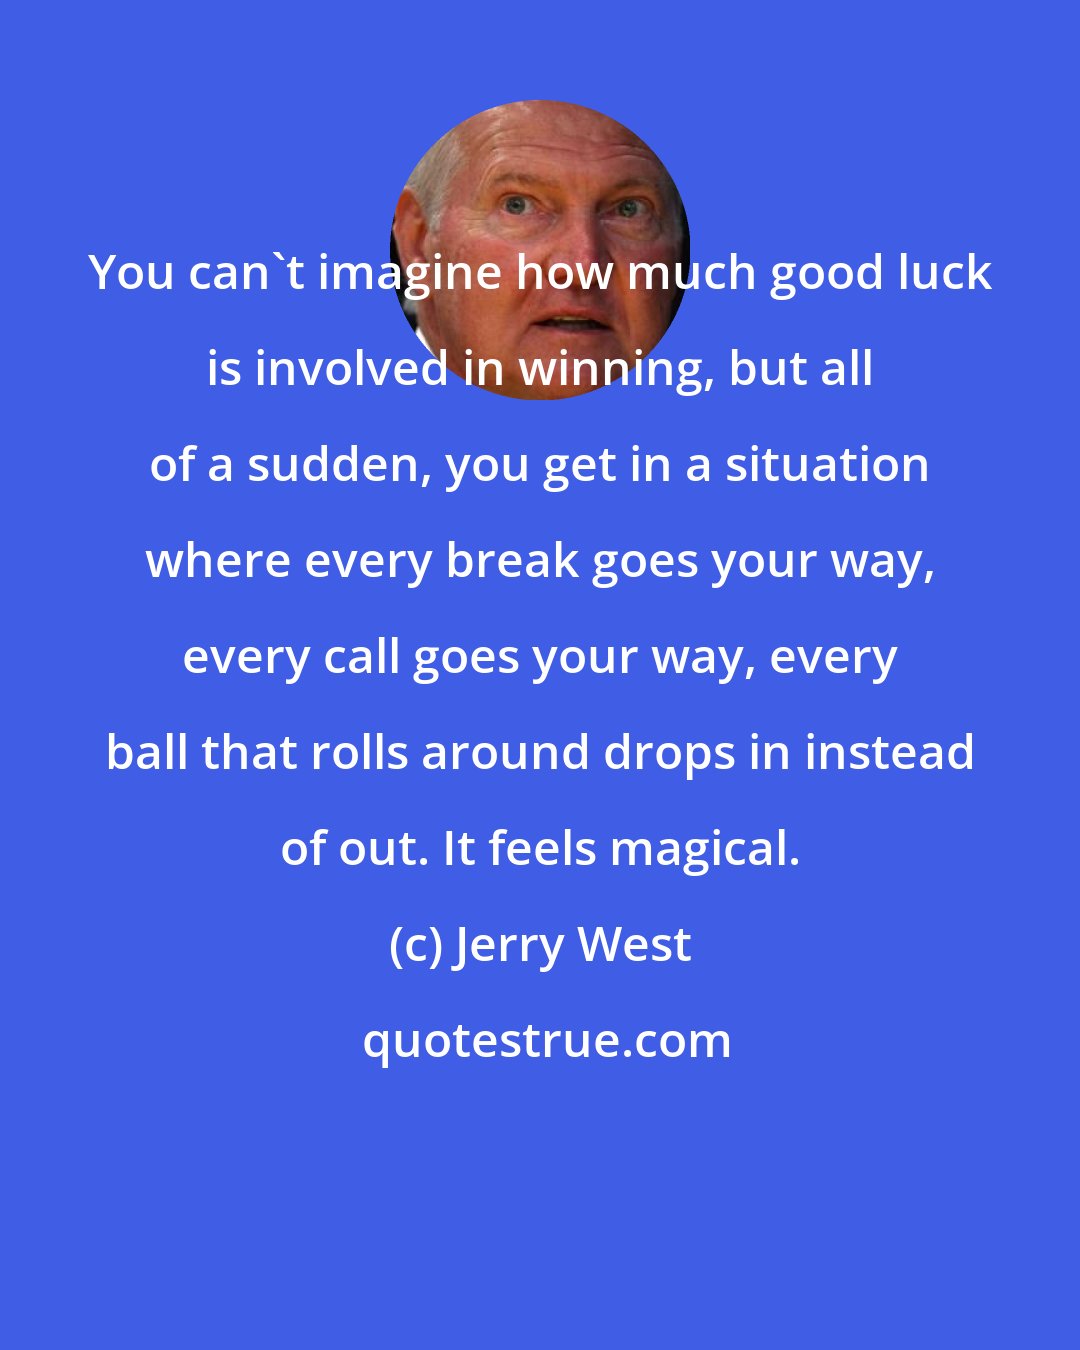 Jerry West: You can't imagine how much good luck is involved in winning, but all of a sudden, you get in a situation where every break goes your way, every call goes your way, every ball that rolls around drops in instead of out. It feels magical.